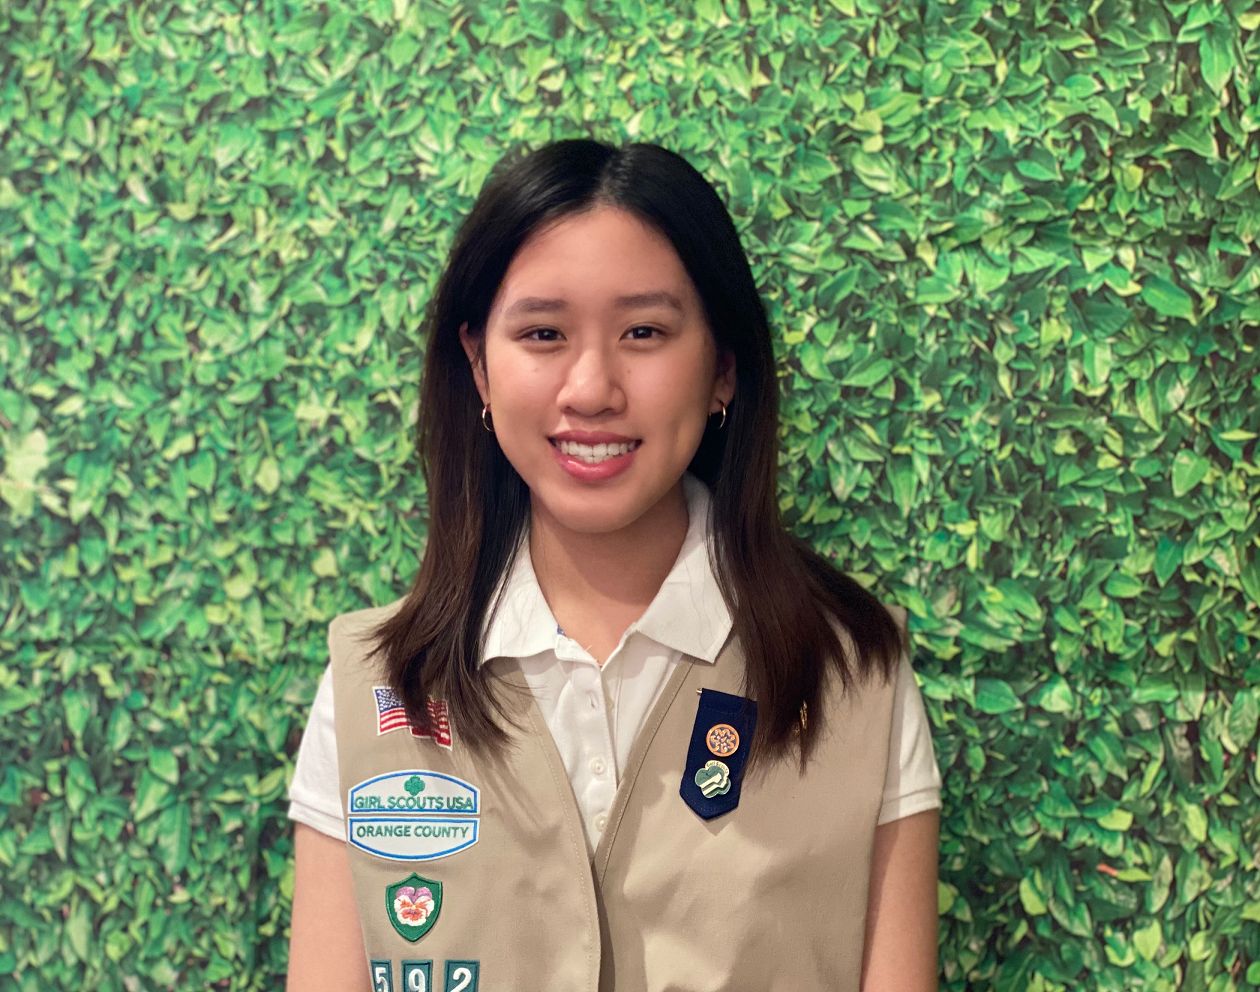 Gold Award Girl Scout Melody of Irvine was chosen among three finalists as winner of the 2021 Dragon Challenge